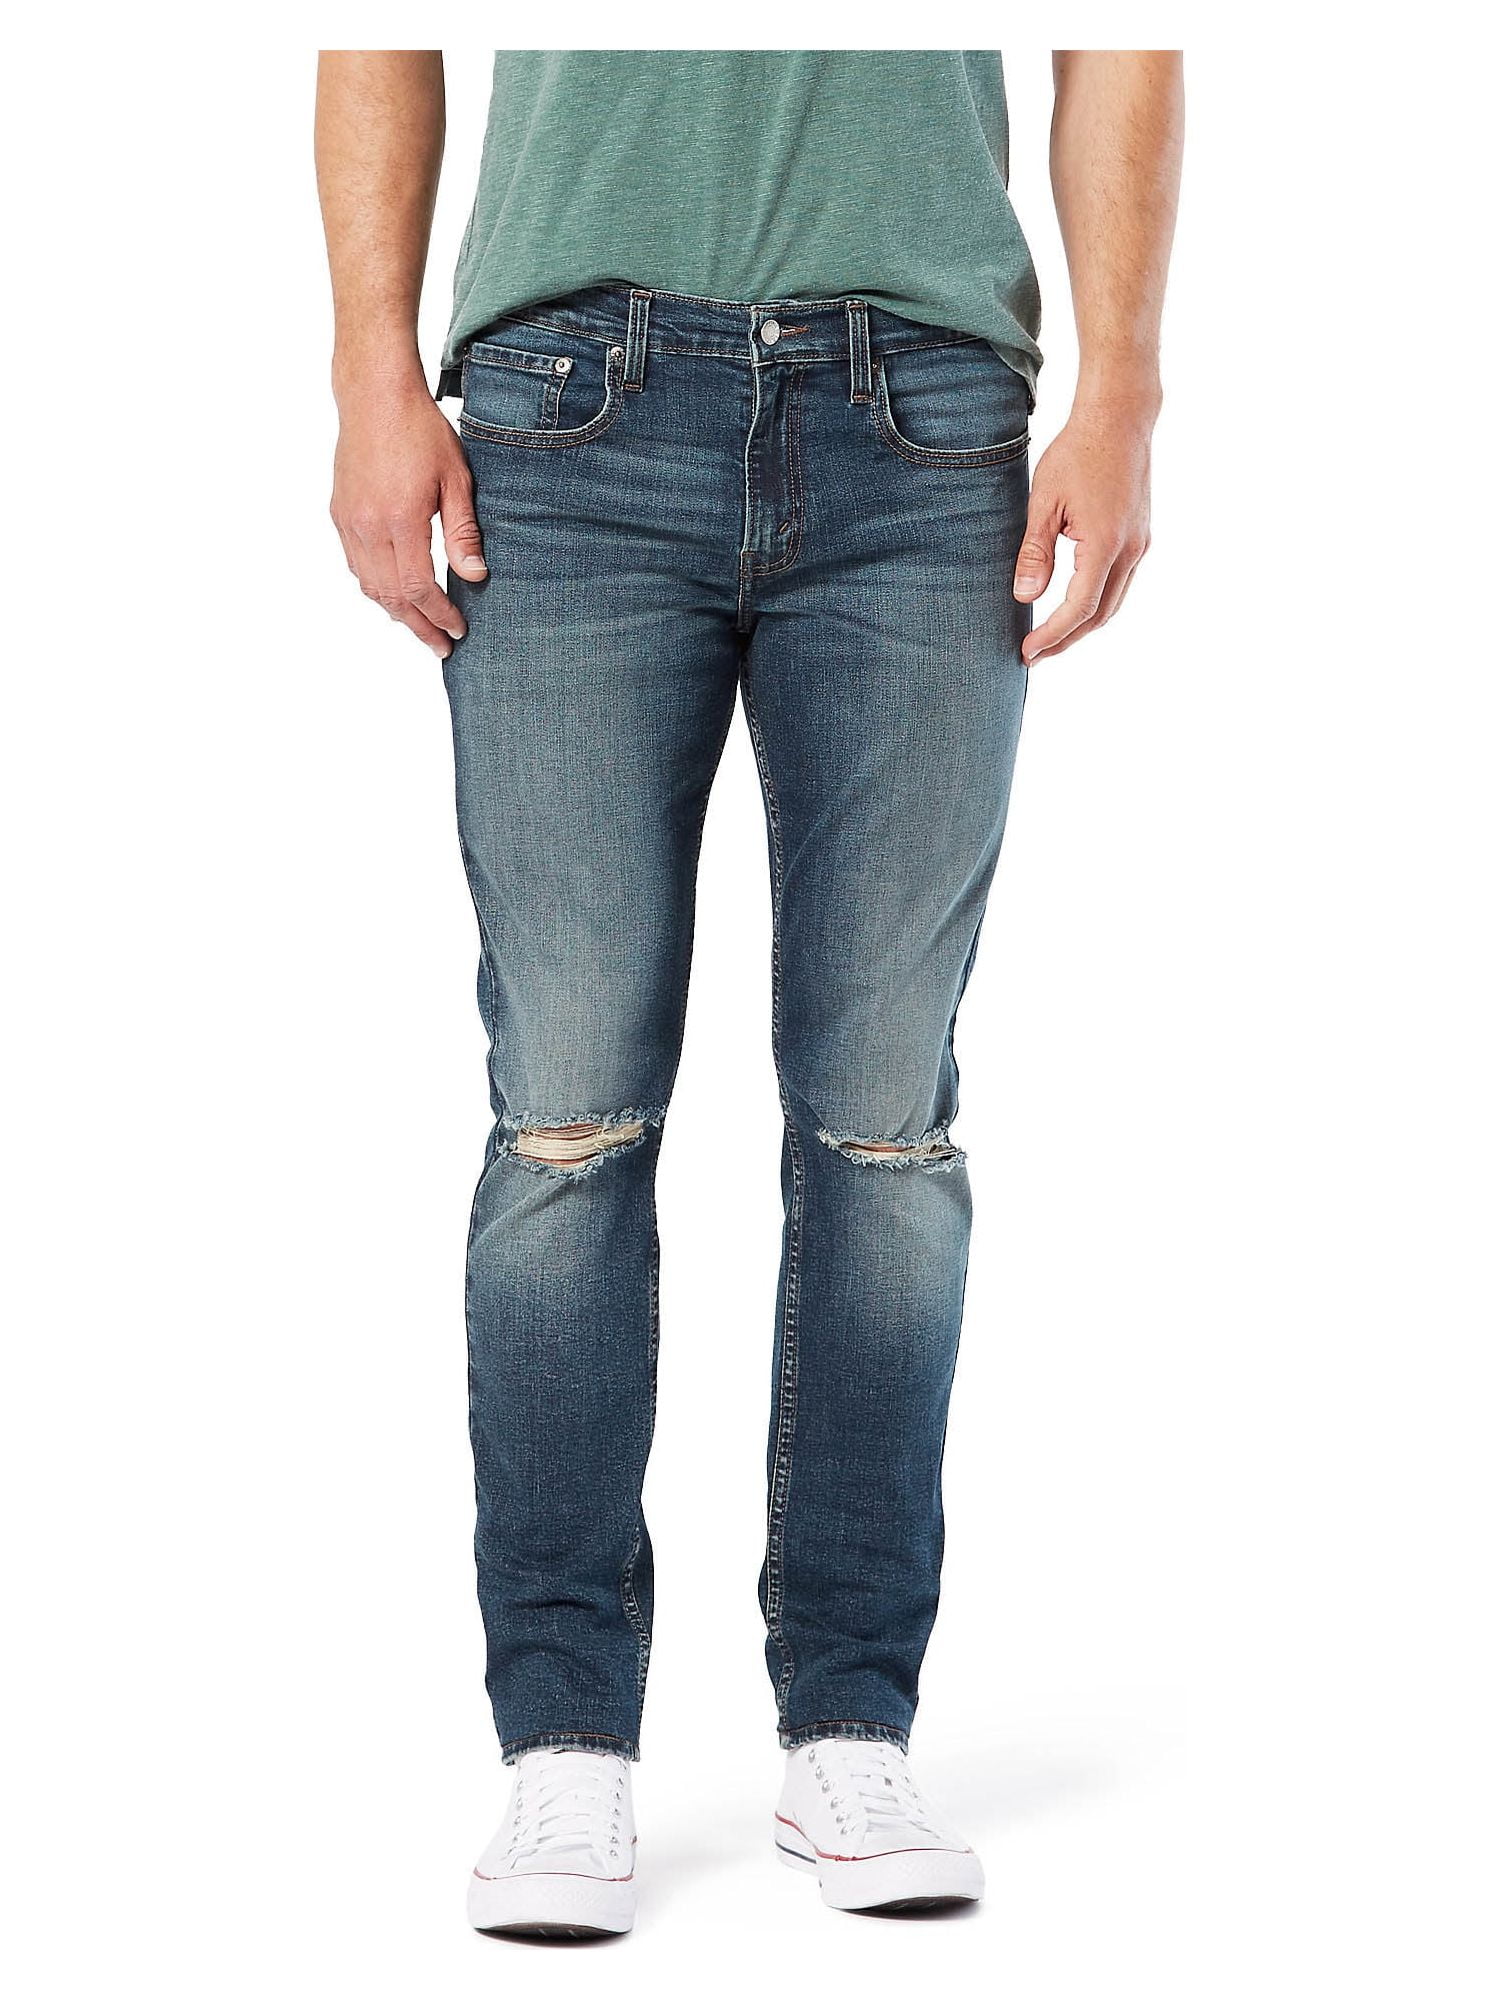 Levi Strauss Co. & Fit by Skinny Jeans Men\'s Signature